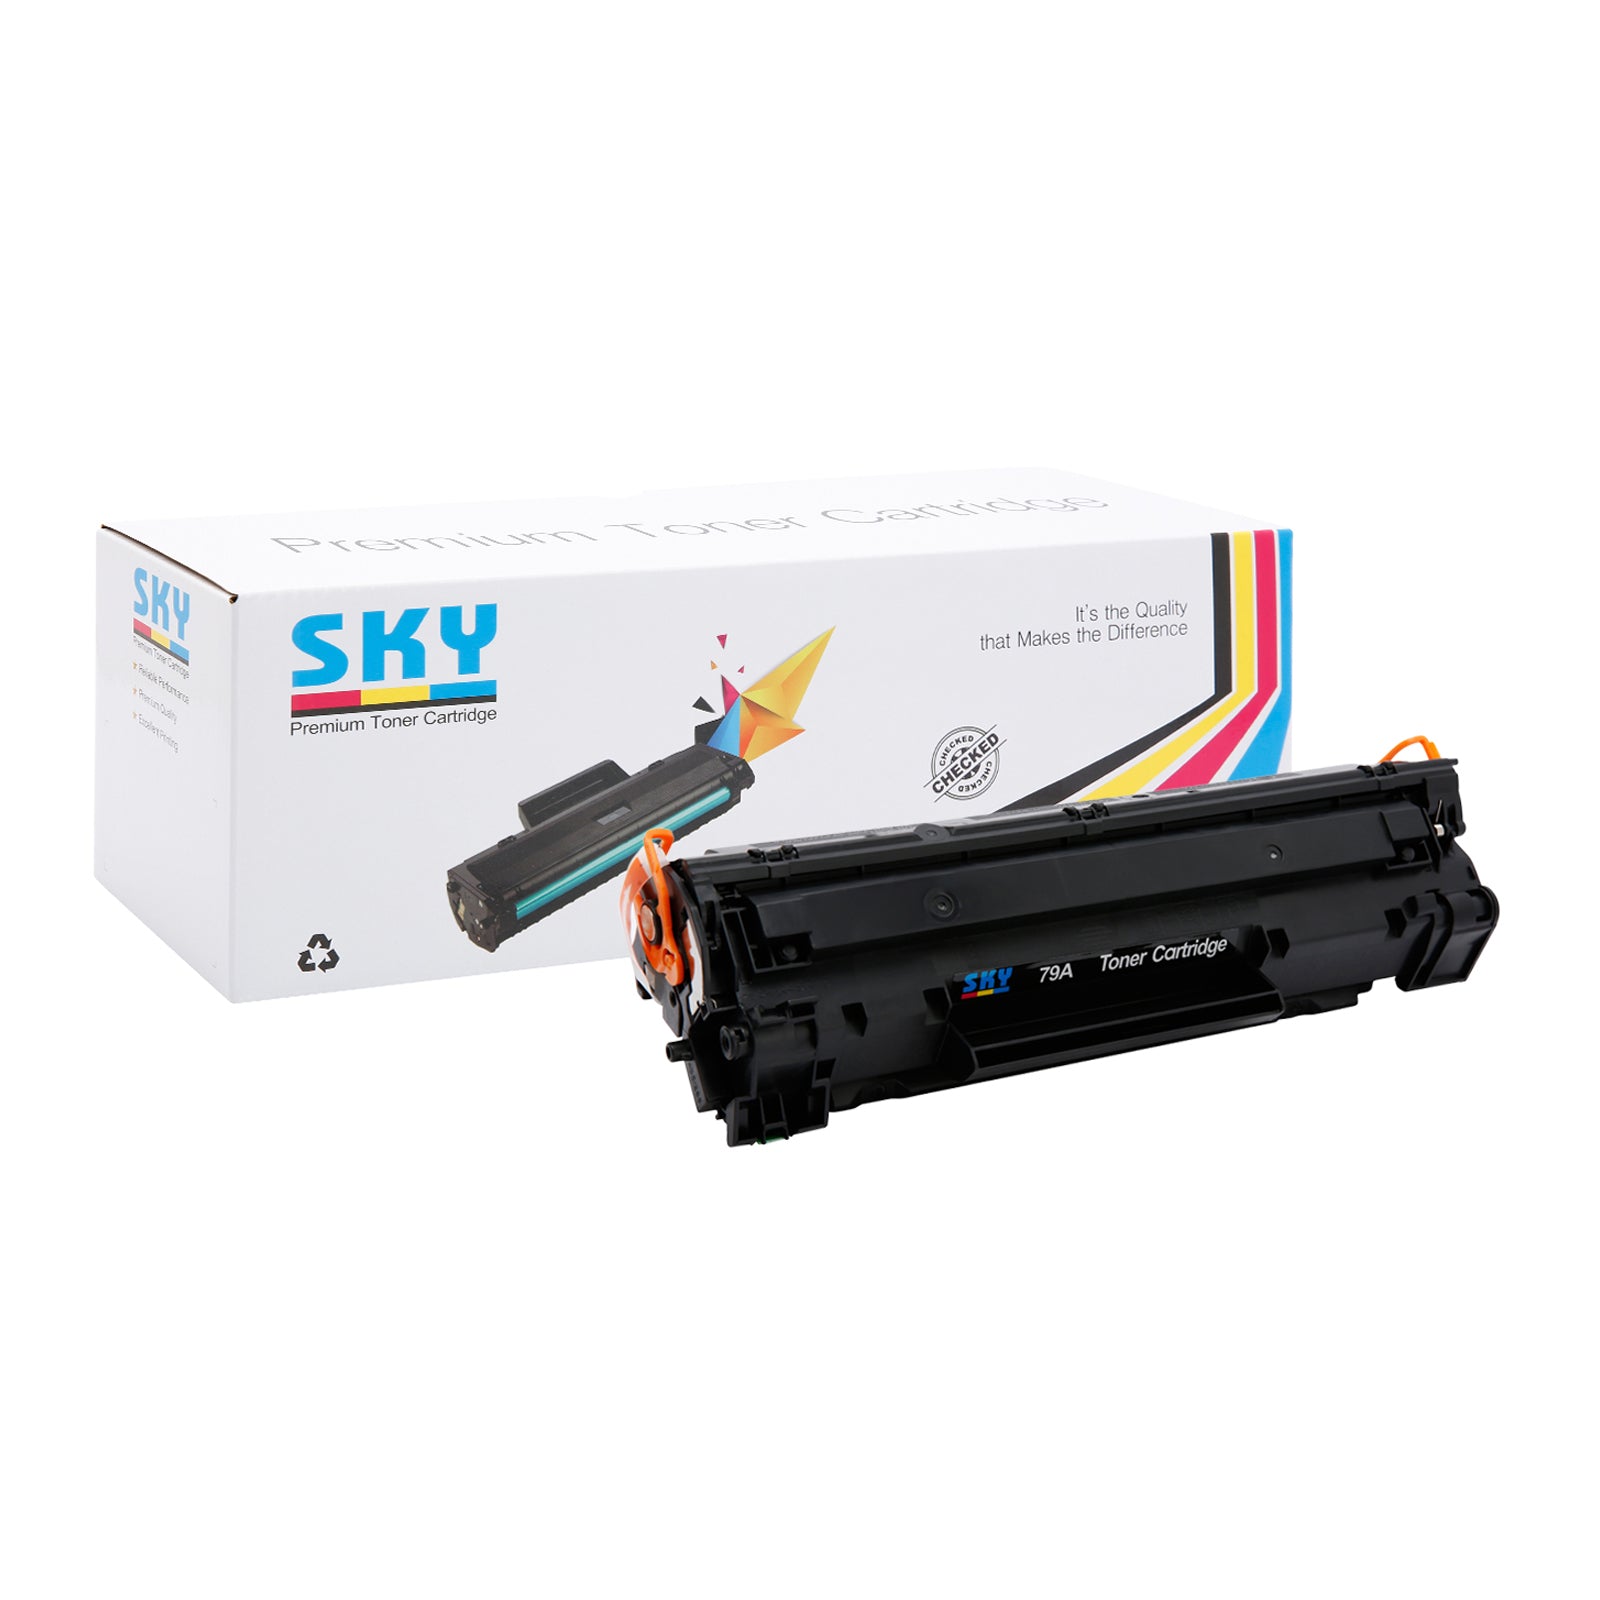 SKY 79A Toner Cartridge CF279A for HP Laserjet Pro M12 and M26 Series Printers